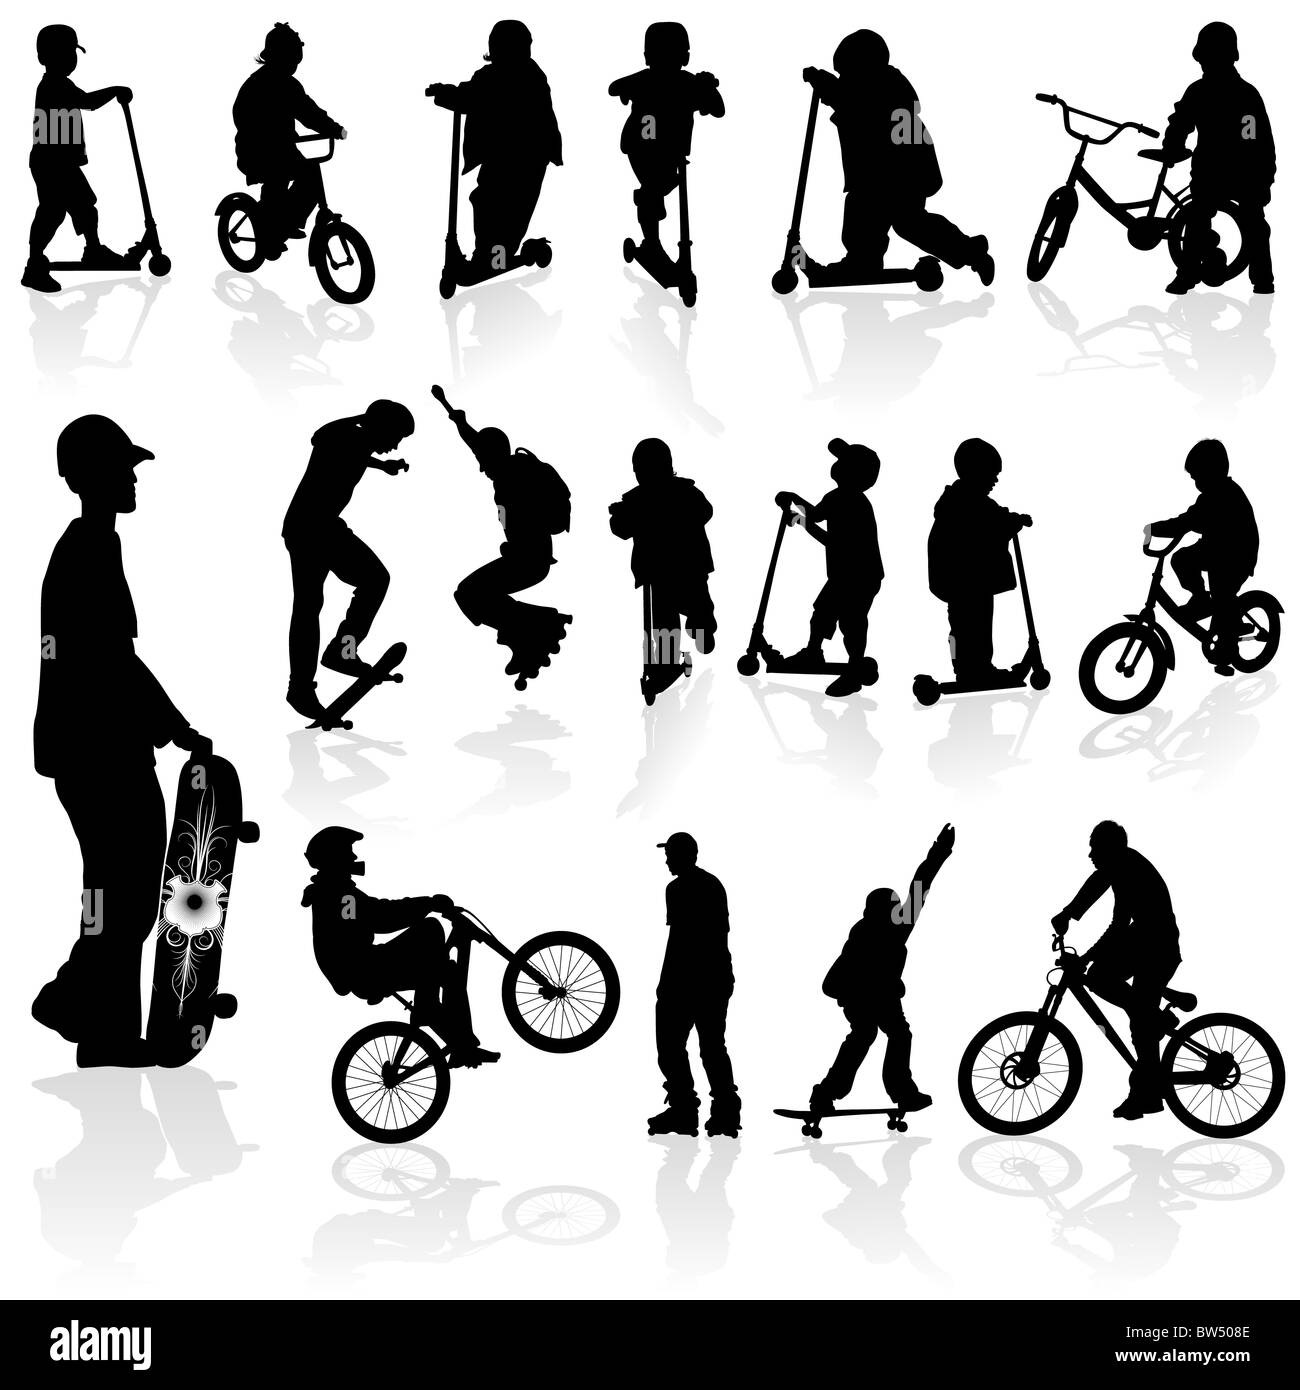 Extreme silhouettes children and man on roller, bicycle, skateboard, vector illustration Stock Photo